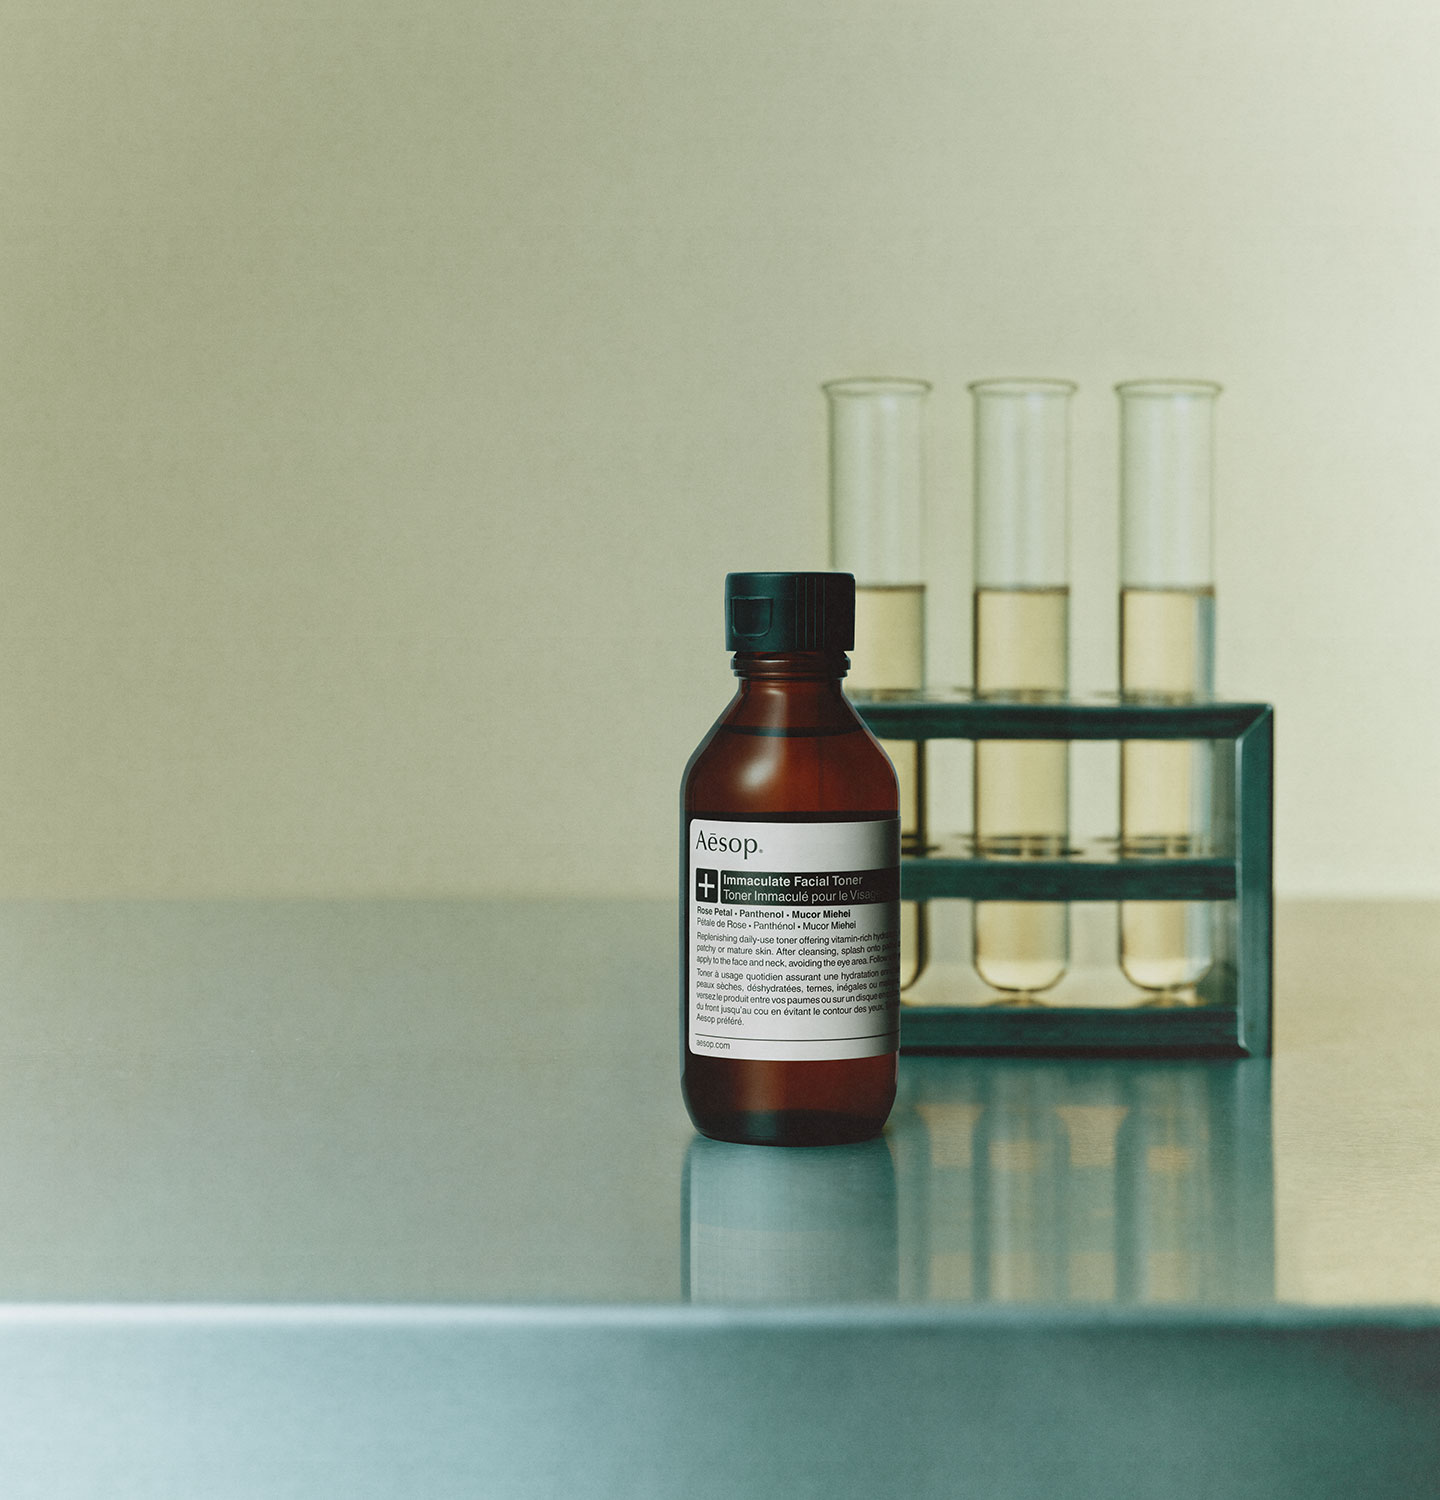 Immaculate facial toner in amber glass bottle placed on metalic surface next to three test tubes